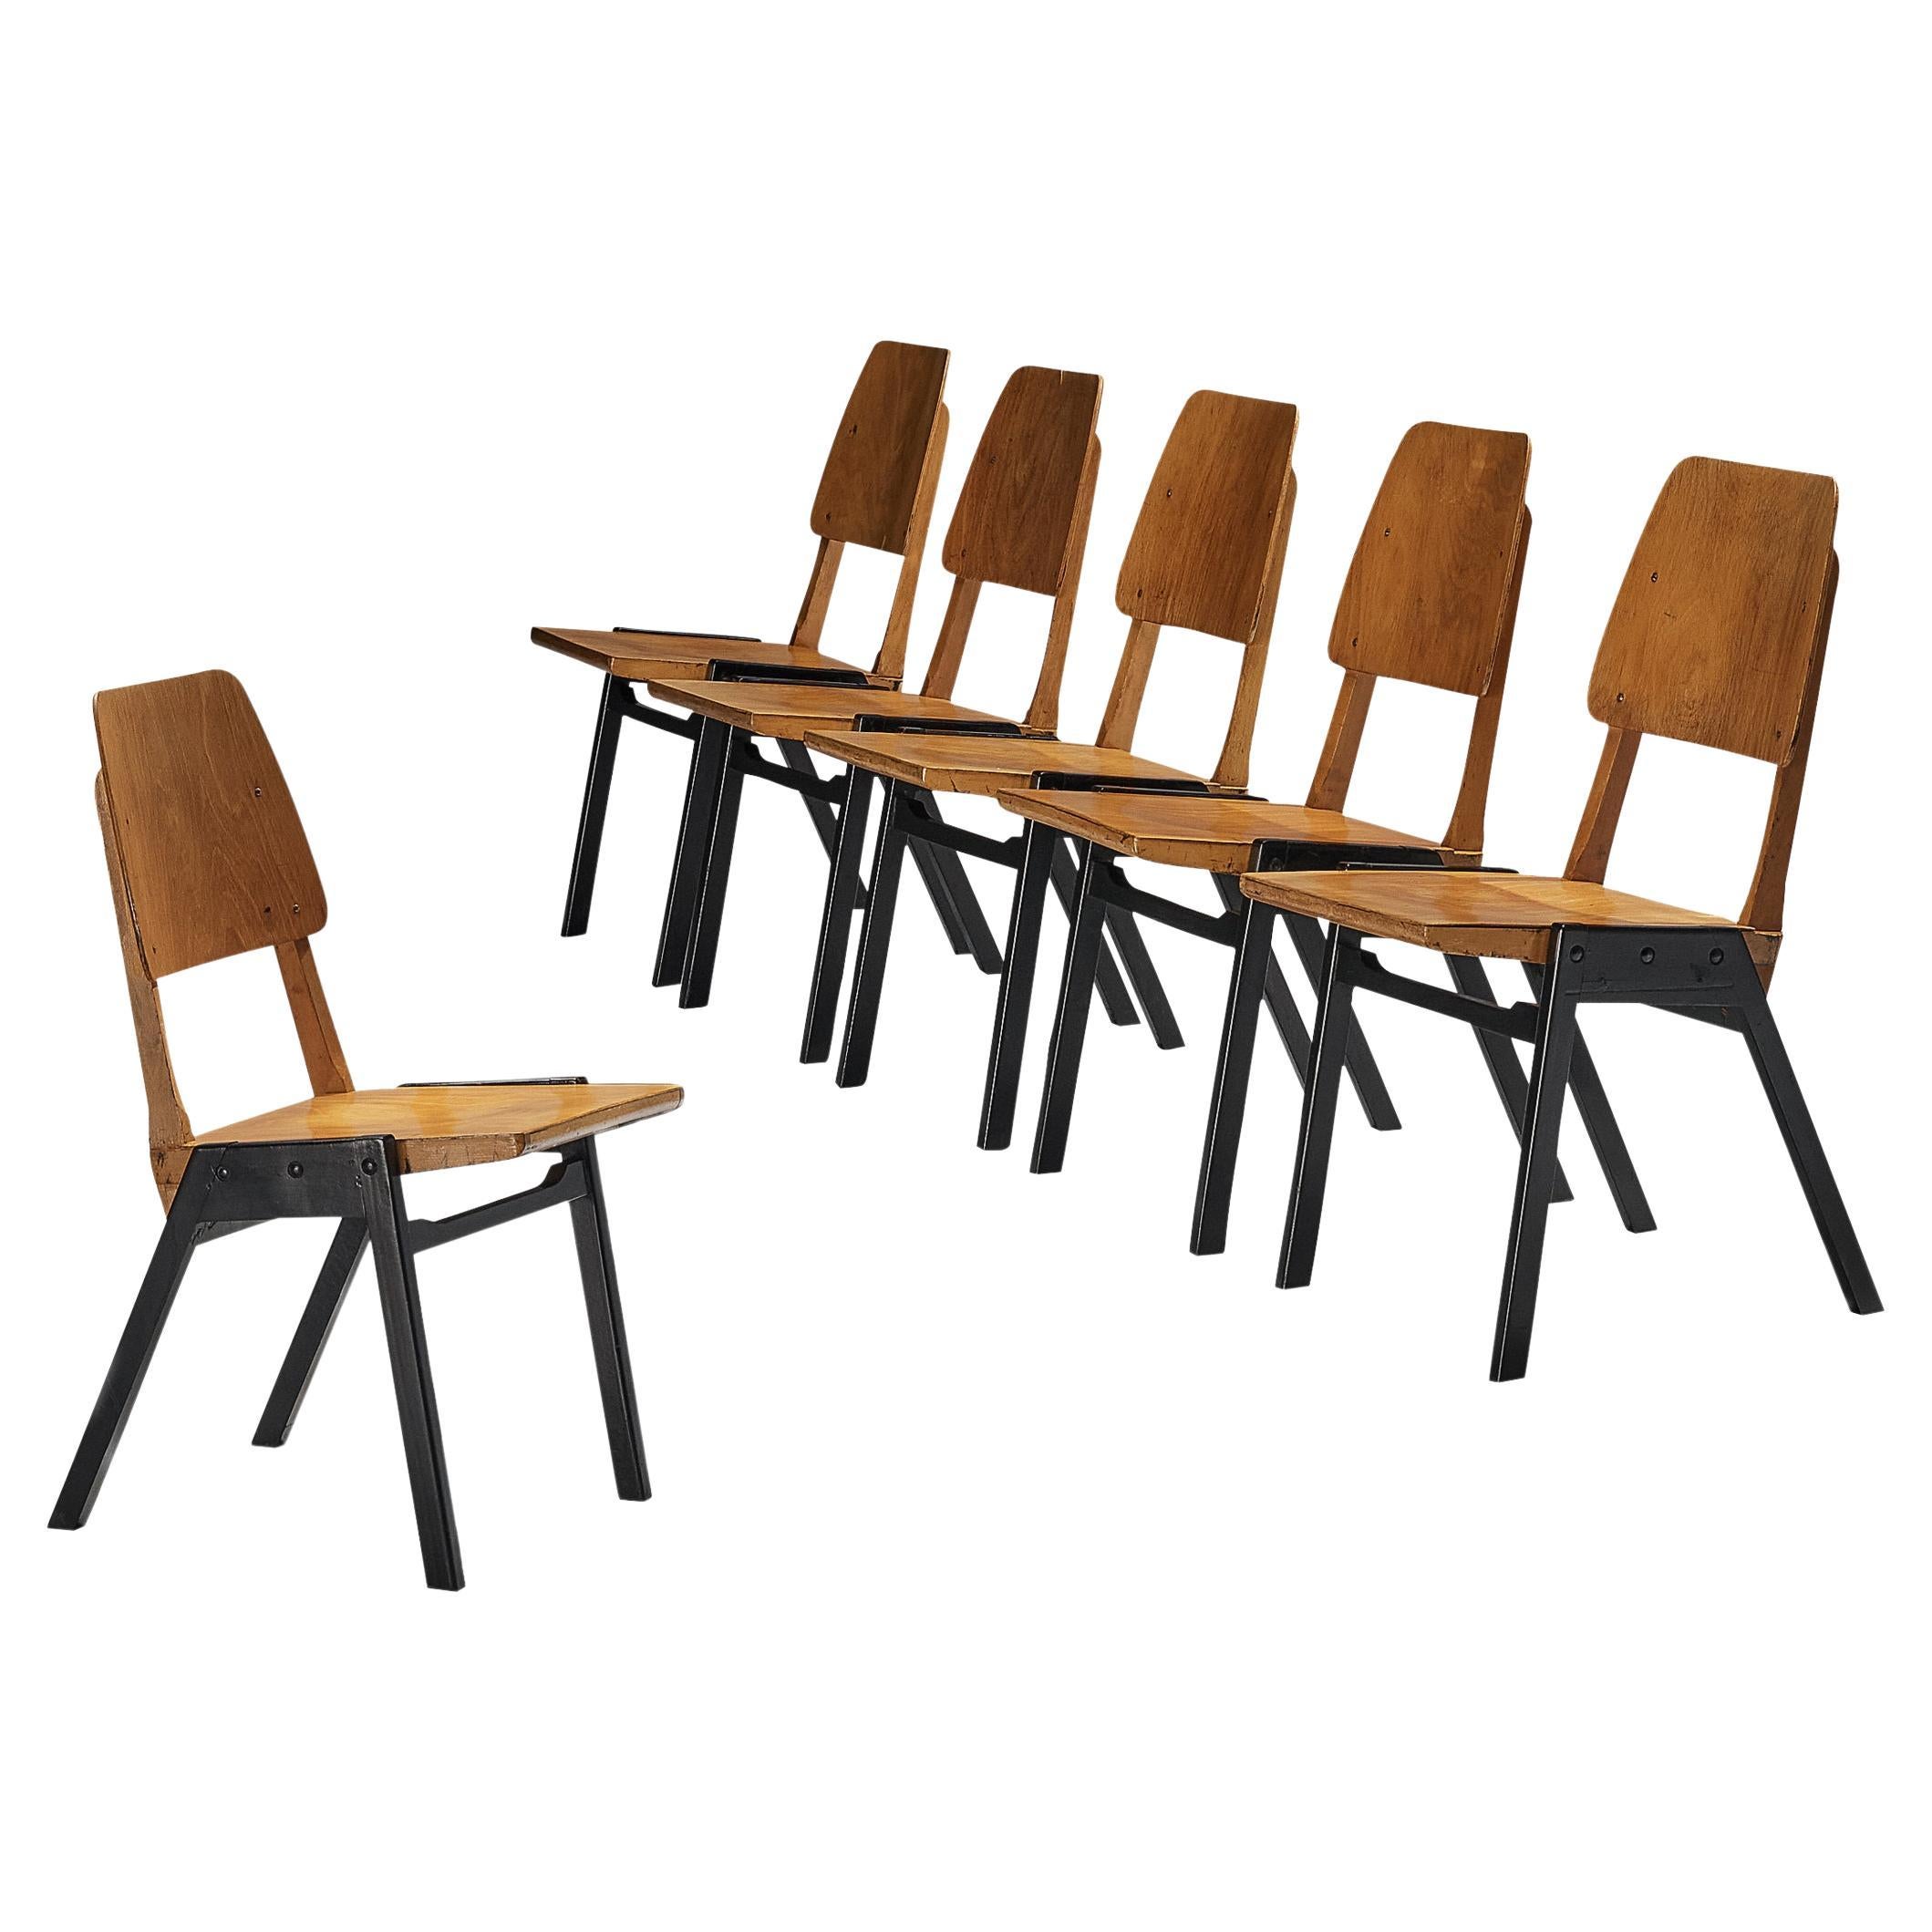 Roland Rainer Dining Room Chairs